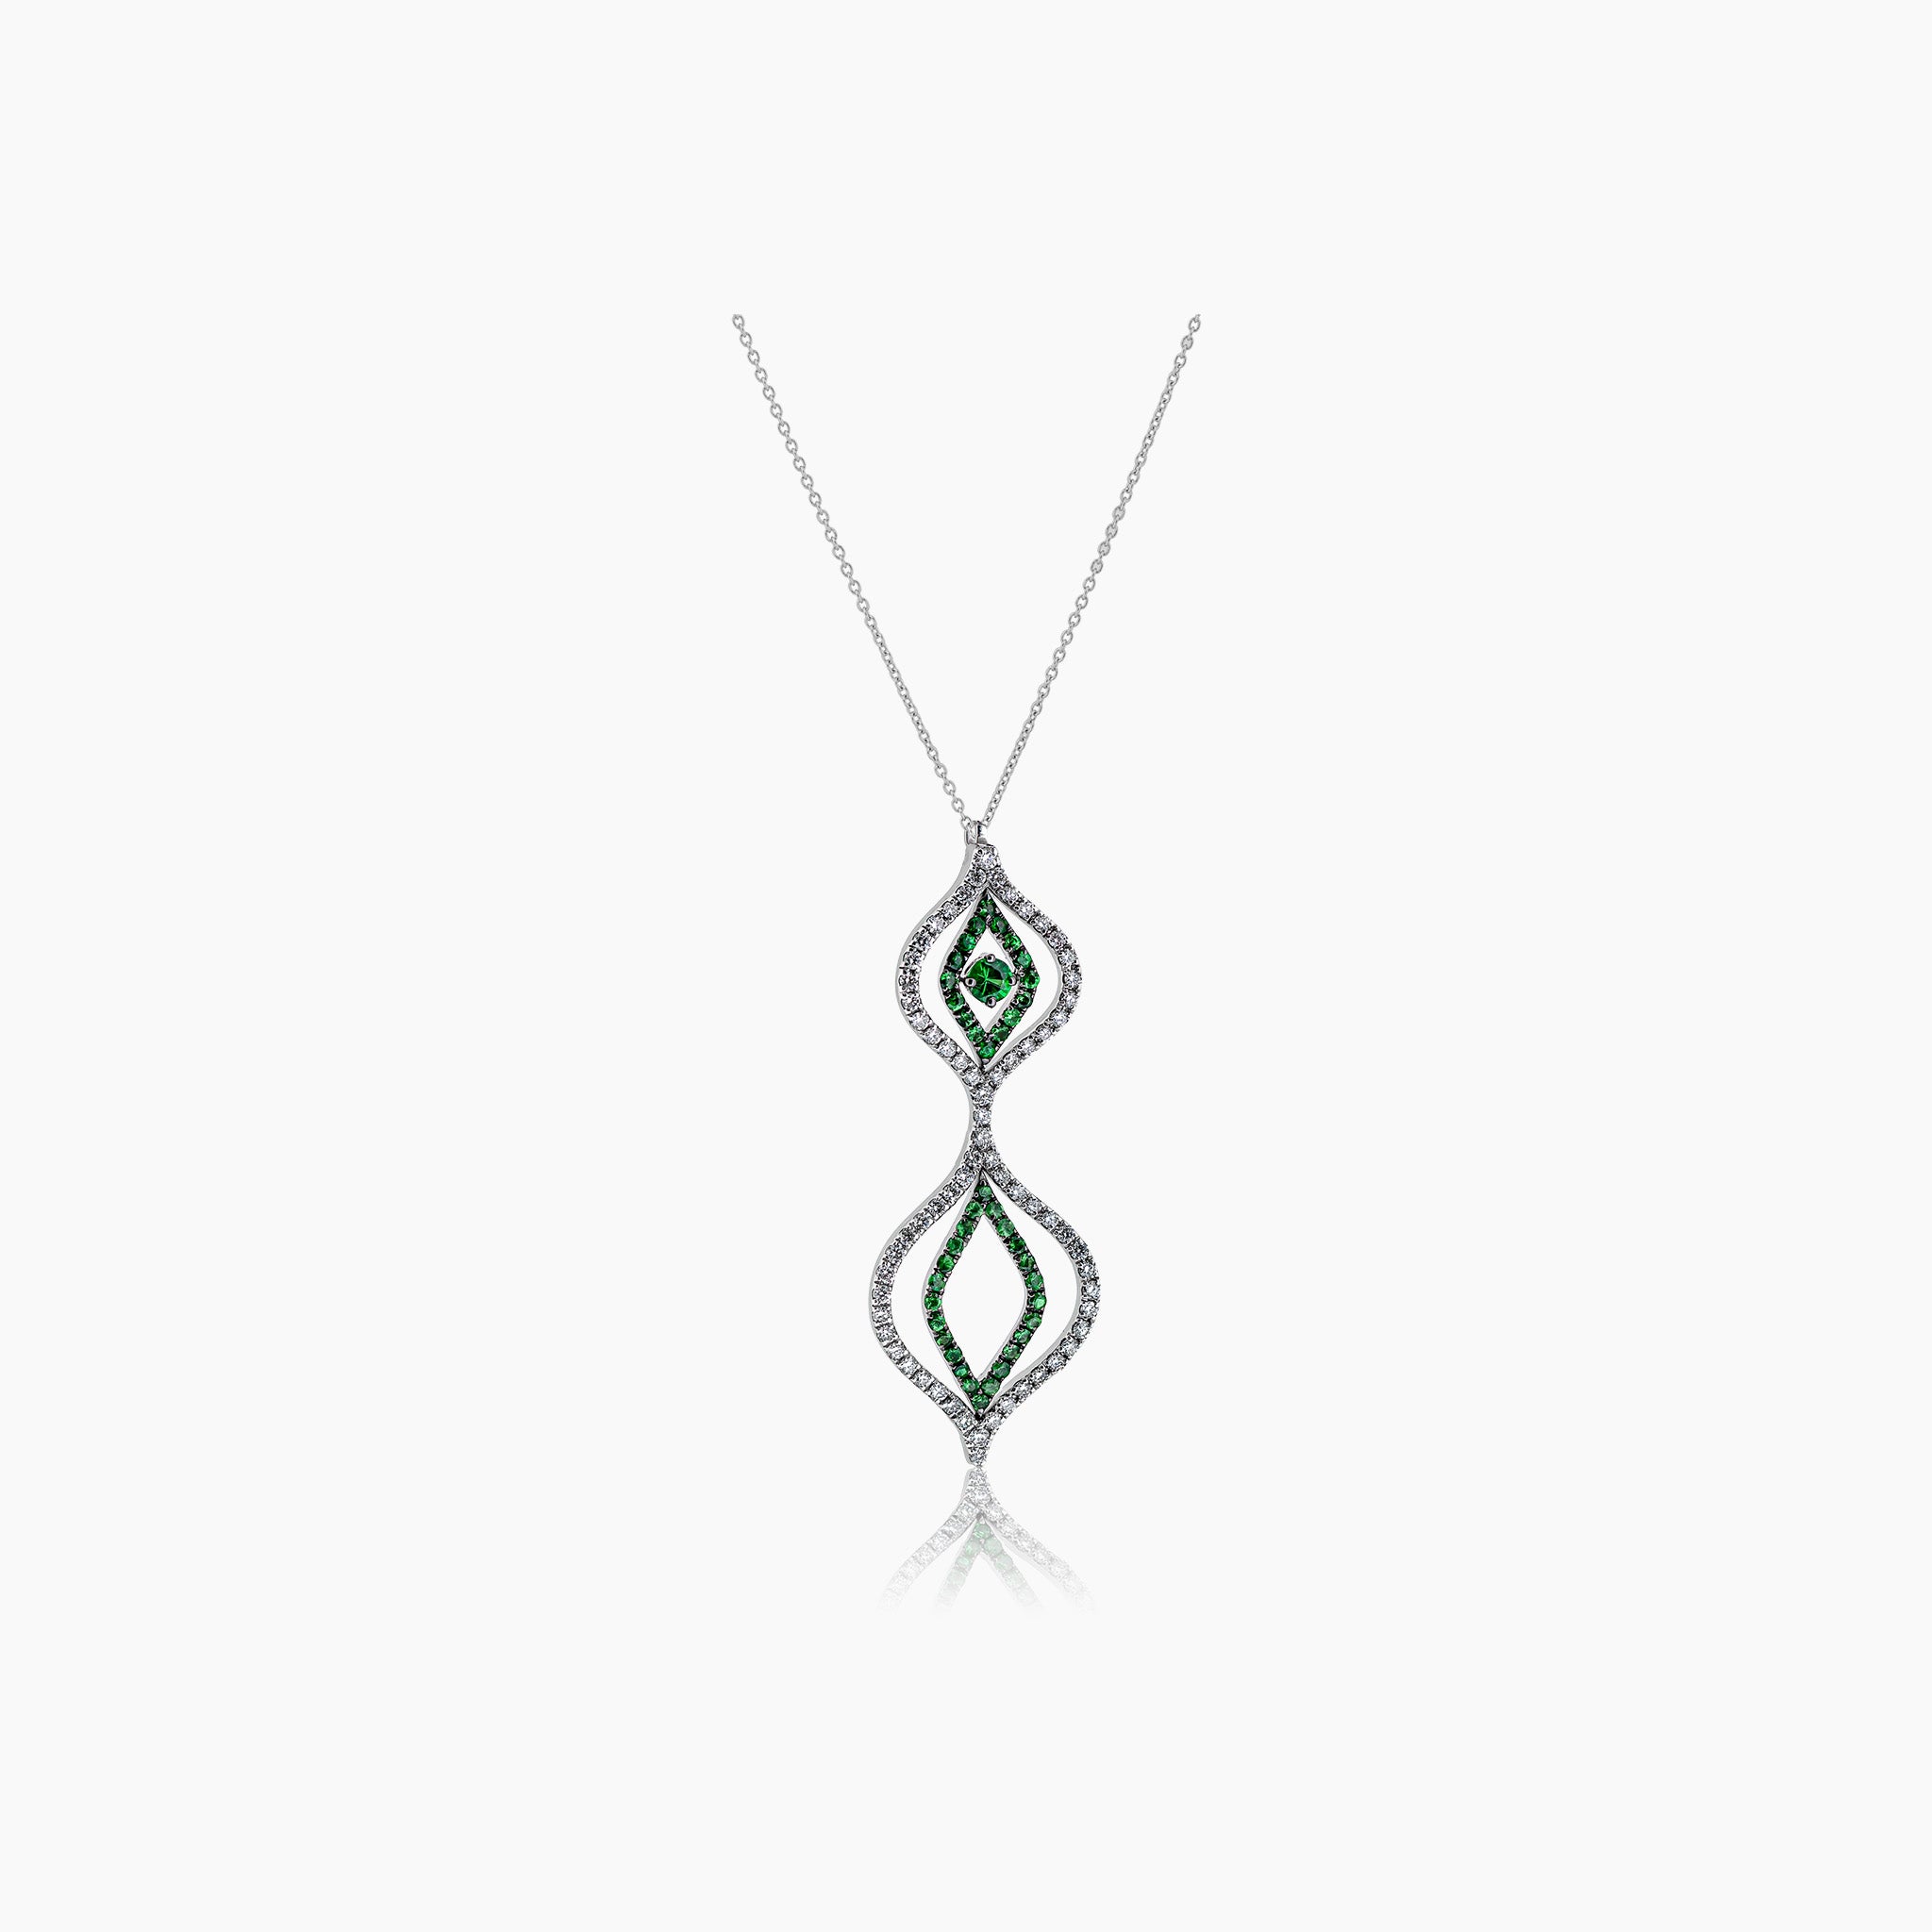 An elegant pendant featuring organic forms and curves, displayed against an off-white background.